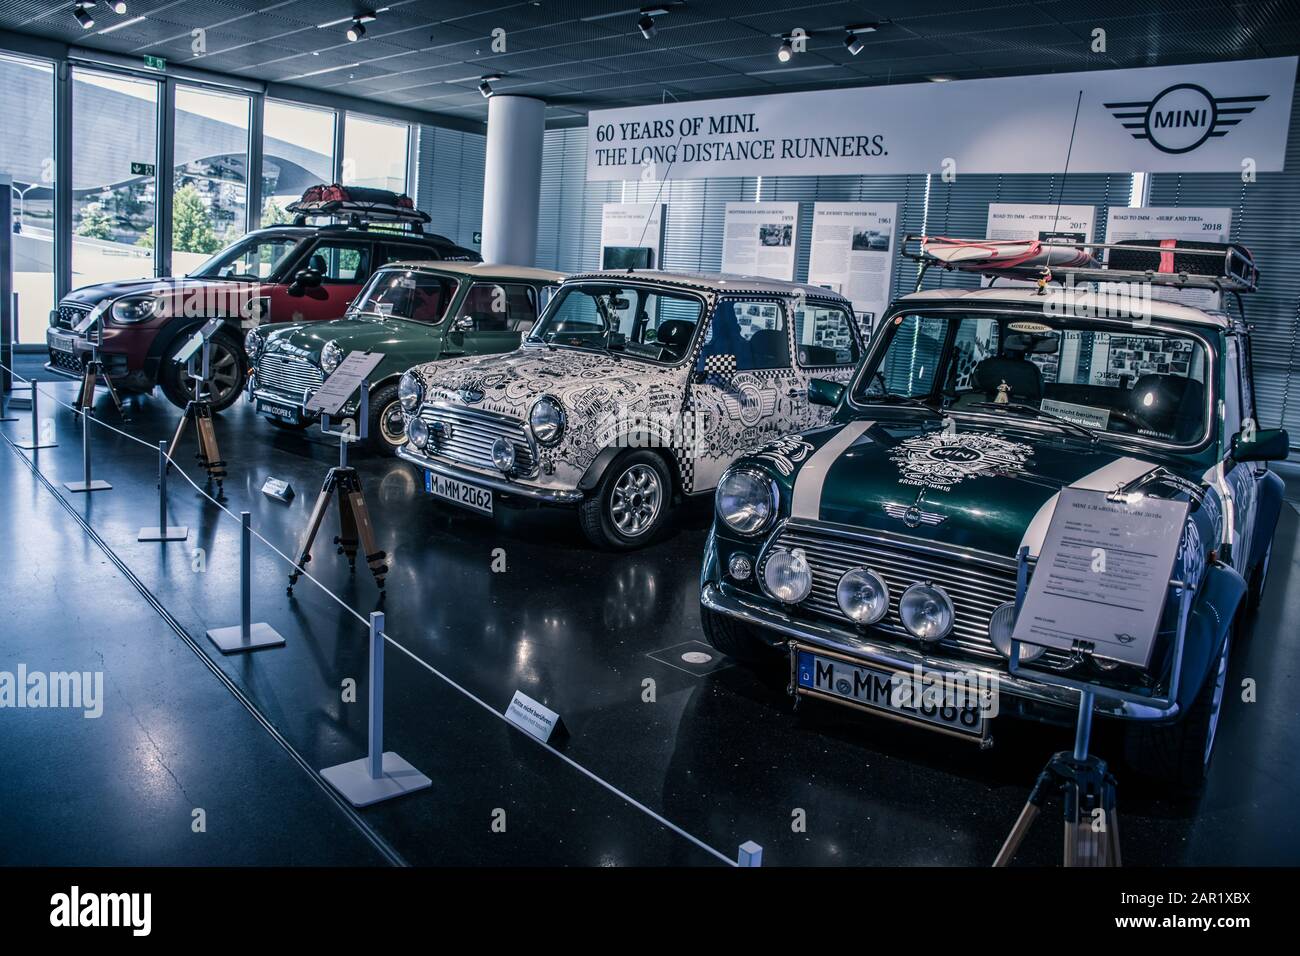 Munich/ Germany - May, 24 2019: the history of Mini Cooper cars at BMW Museum/ BMW Welt Stock Photo